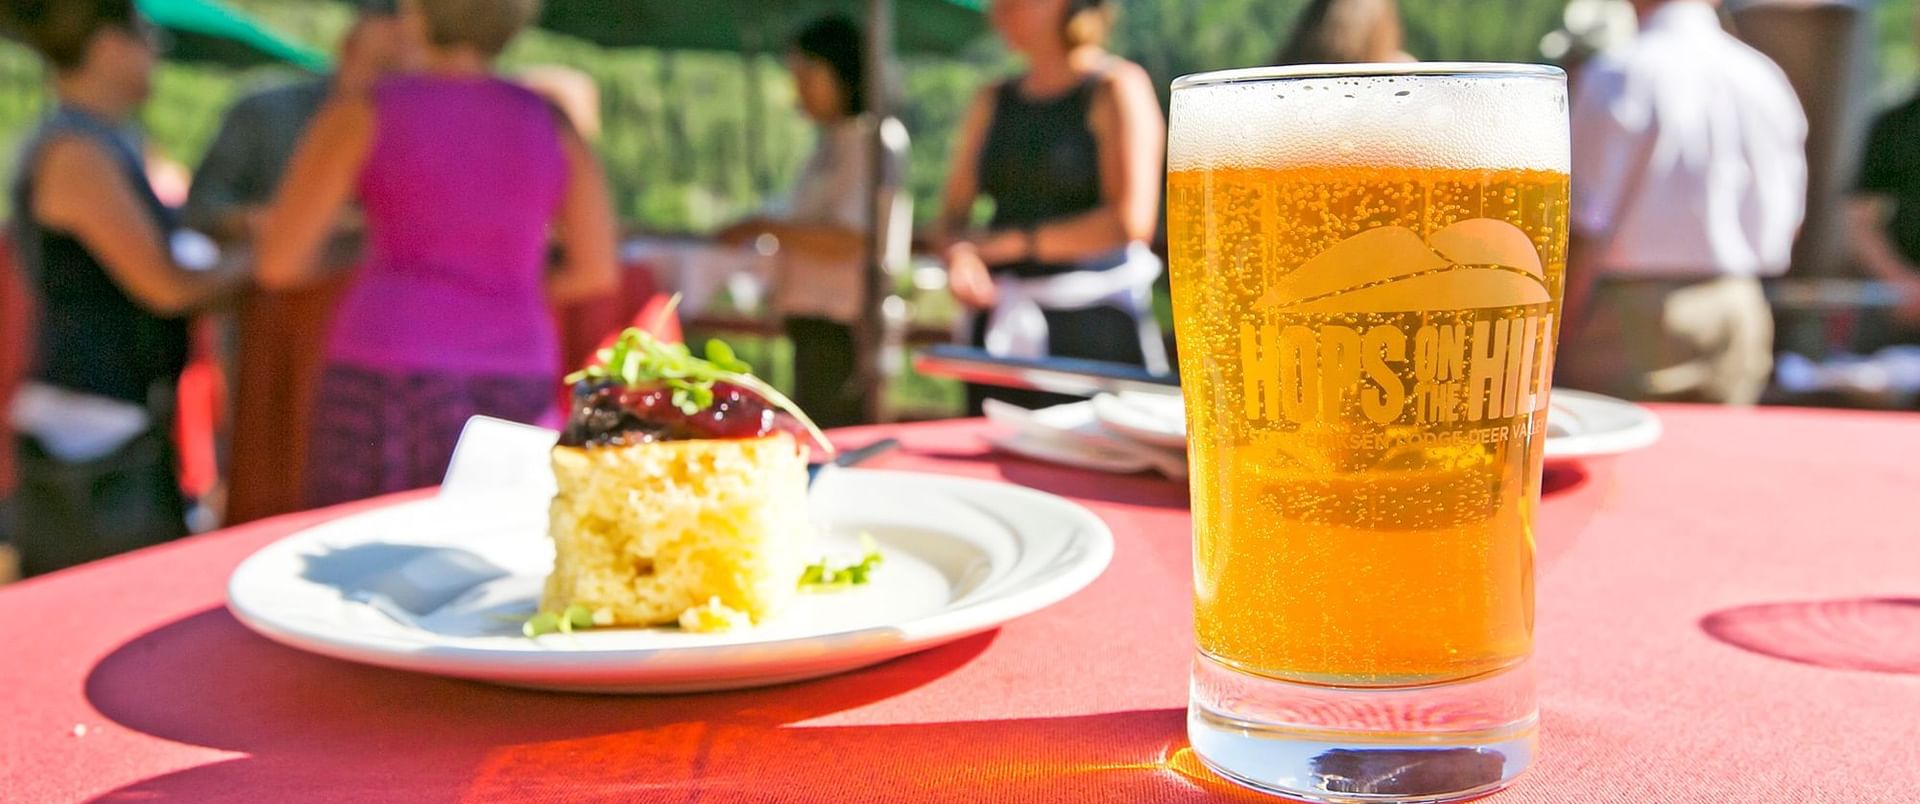 A plate of food and a beer is placed on a table near Stein Eriksen Residences